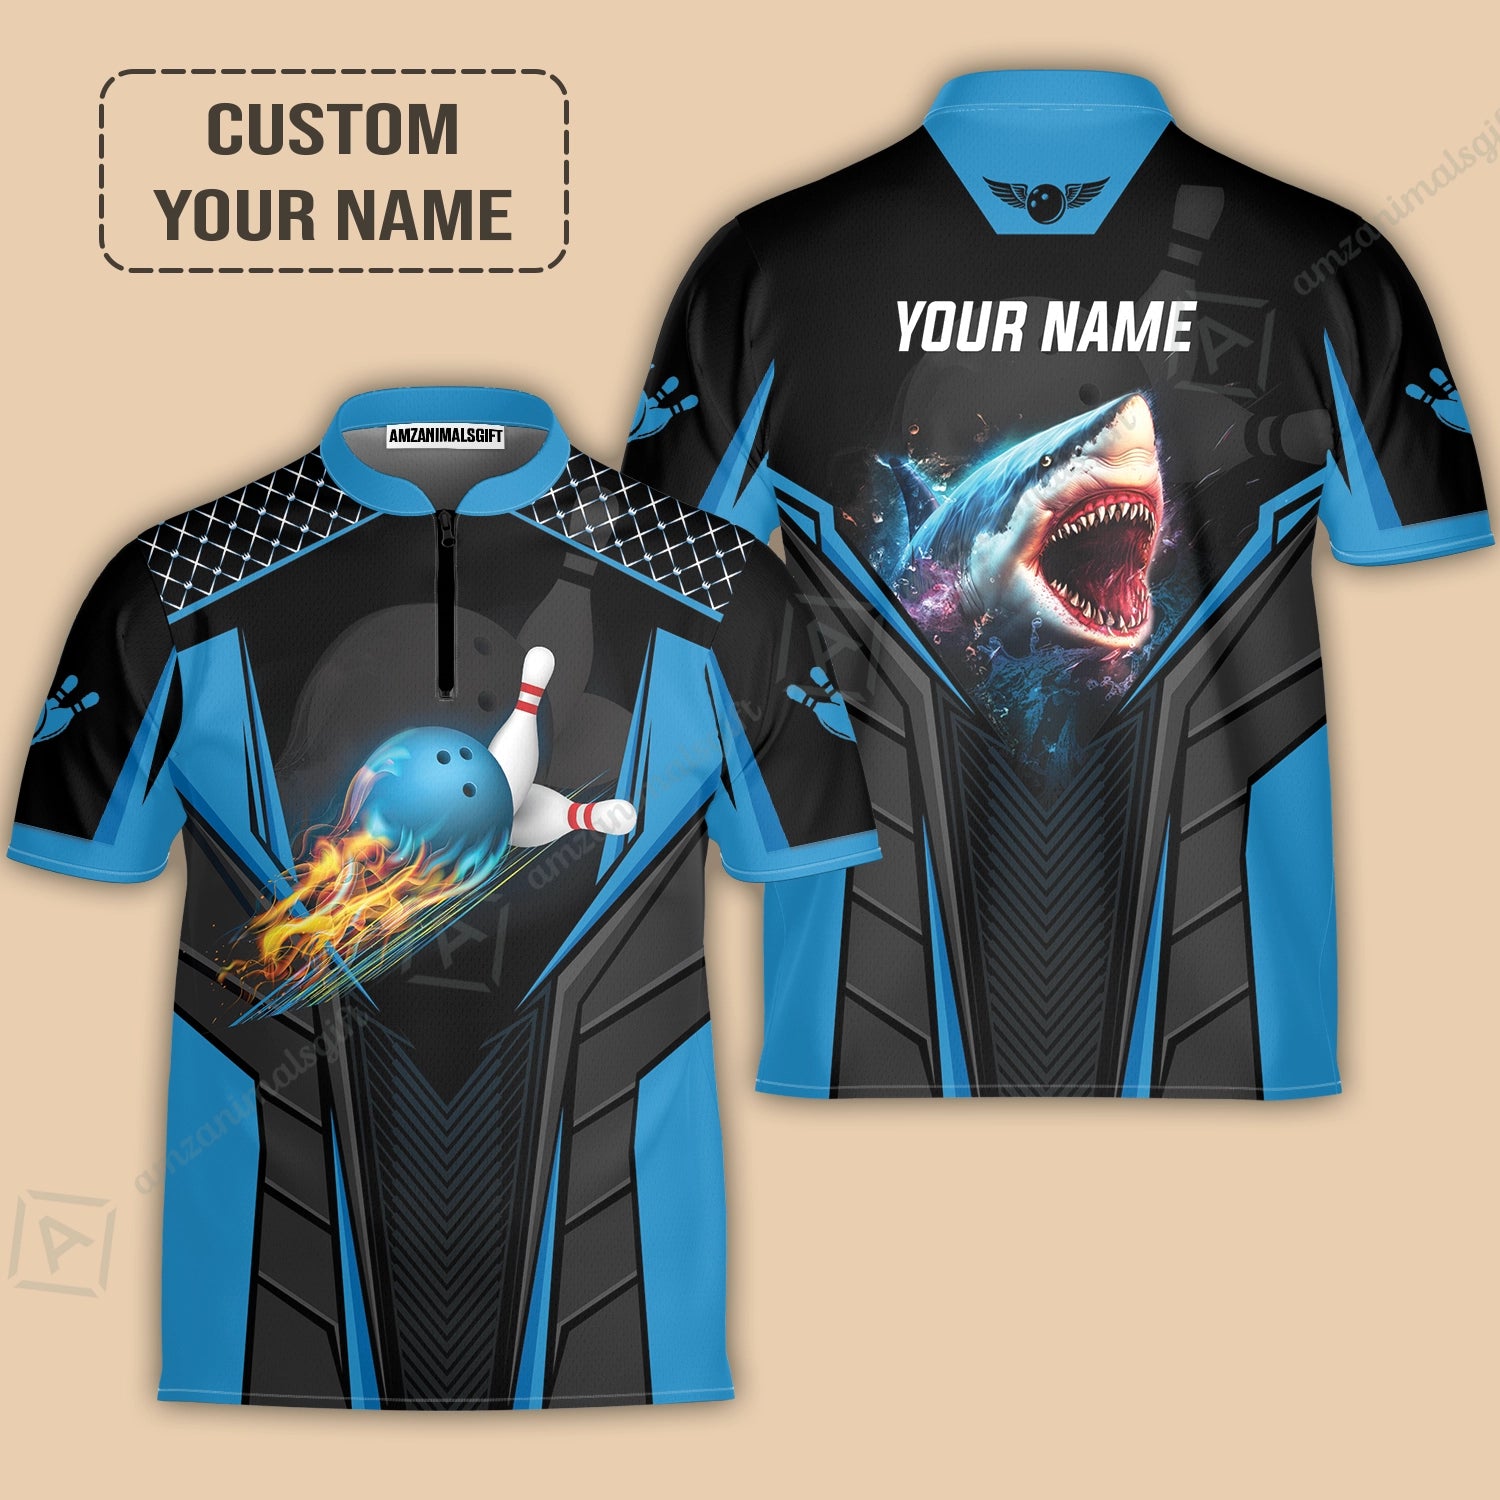 Personalized Bowling Jersey, Shark Team Blue Bowling Ball Customized Shirt For Friend, Family, Bowling Players